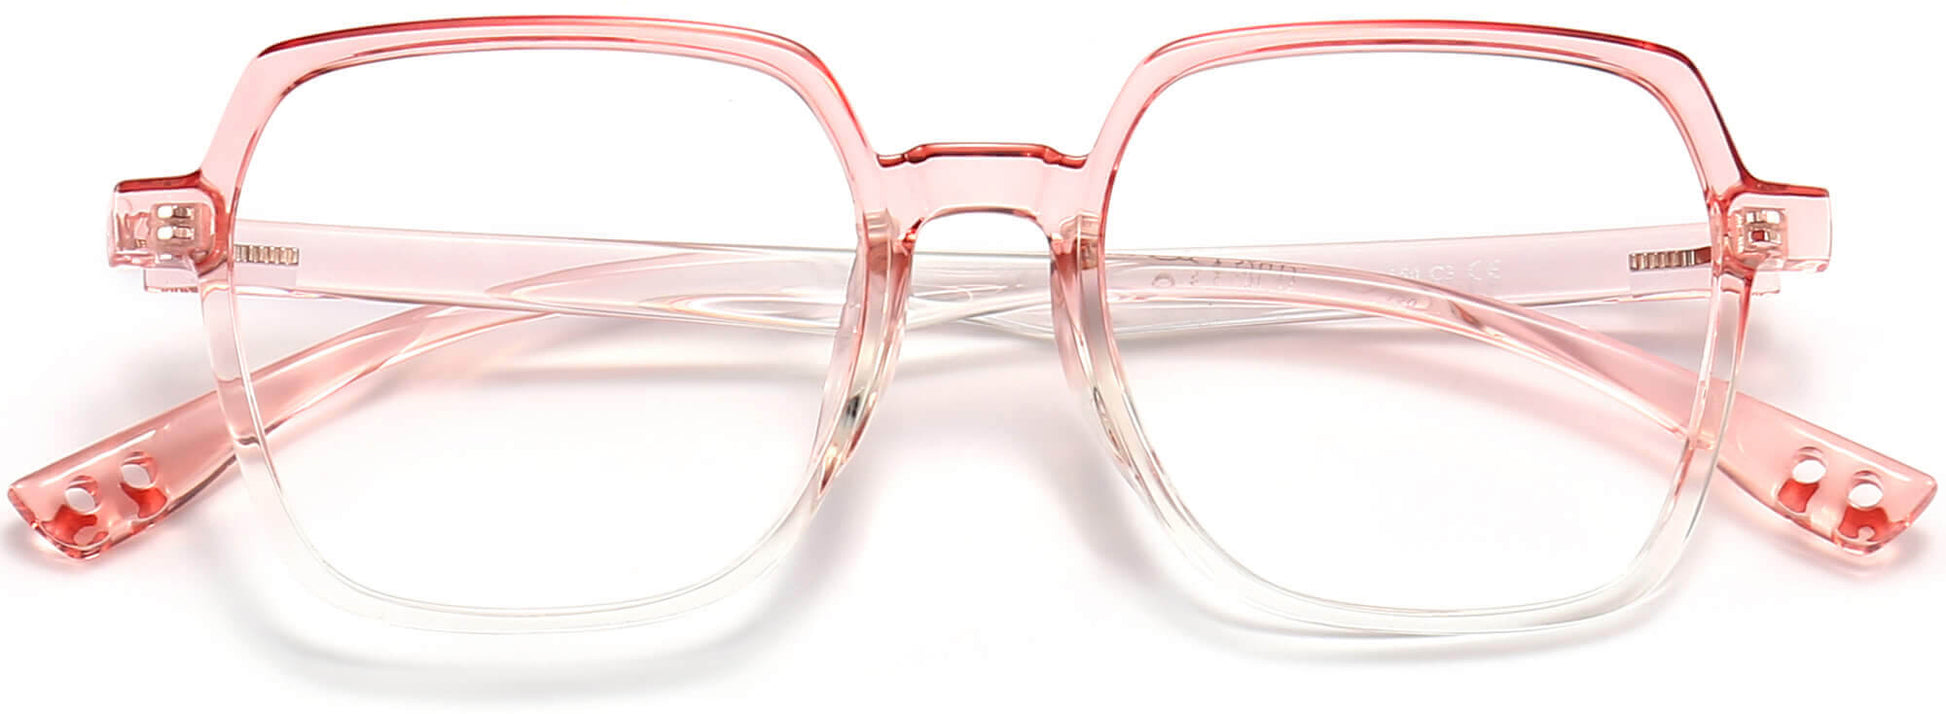 Presley Square Pink Eyeglasses from ANRRI, closed view